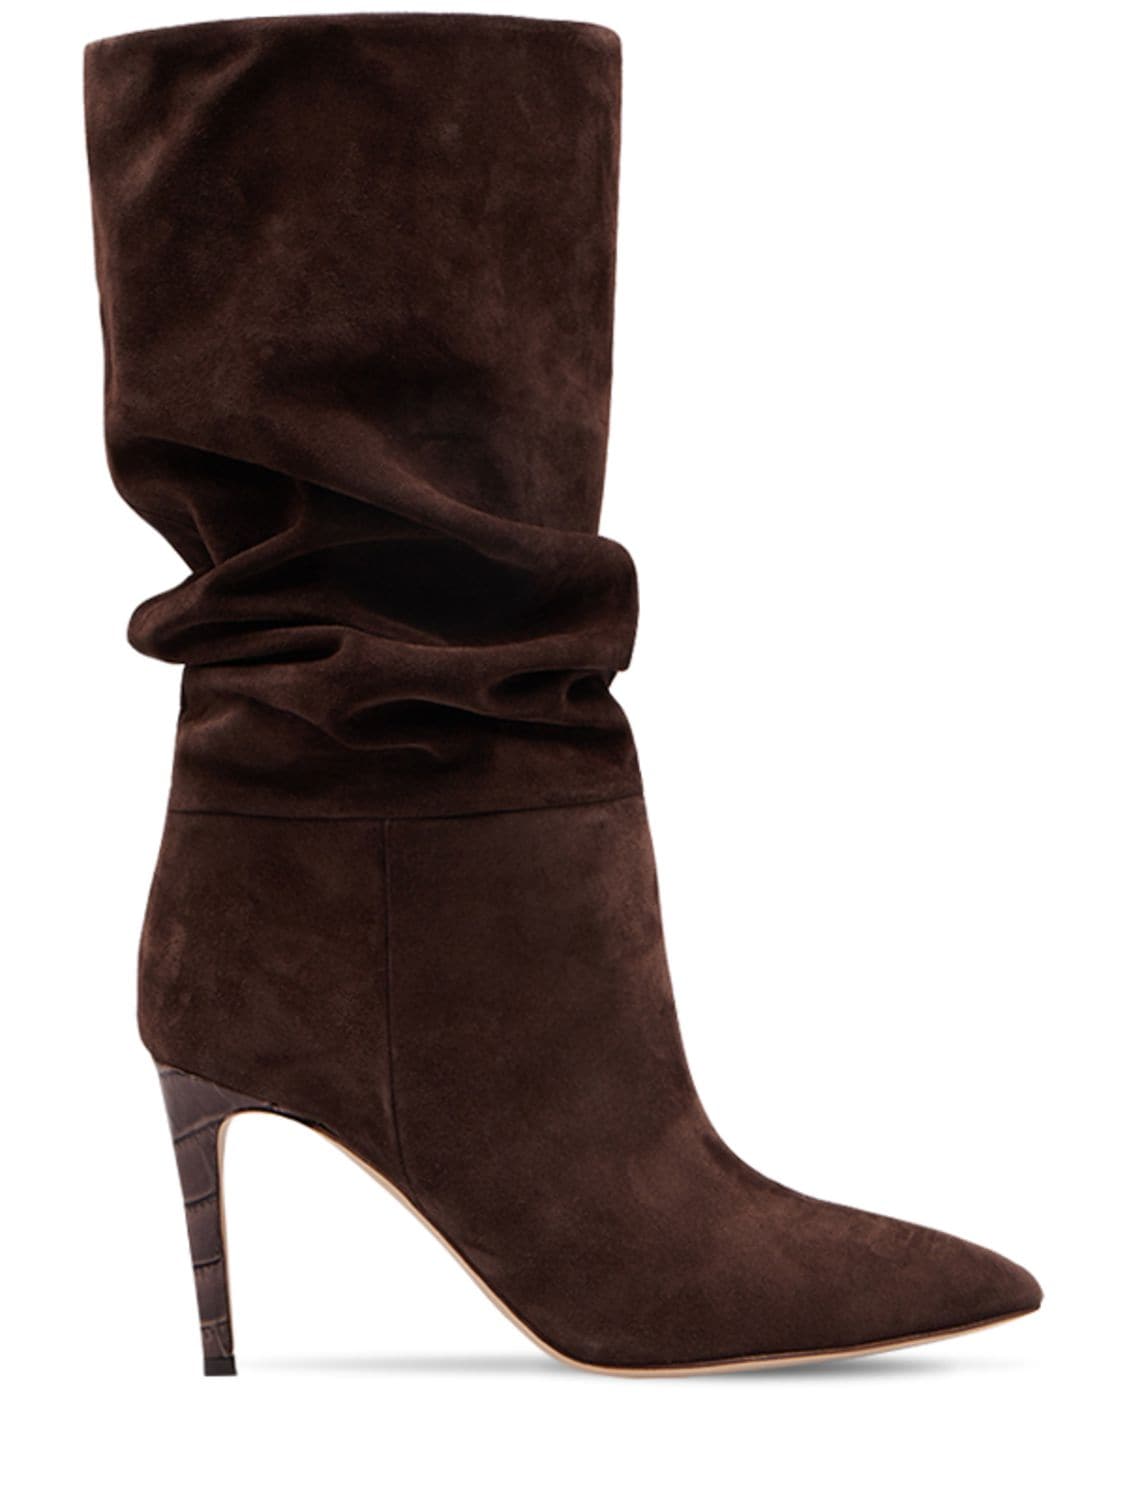 85mm Slouchy Suede Boots